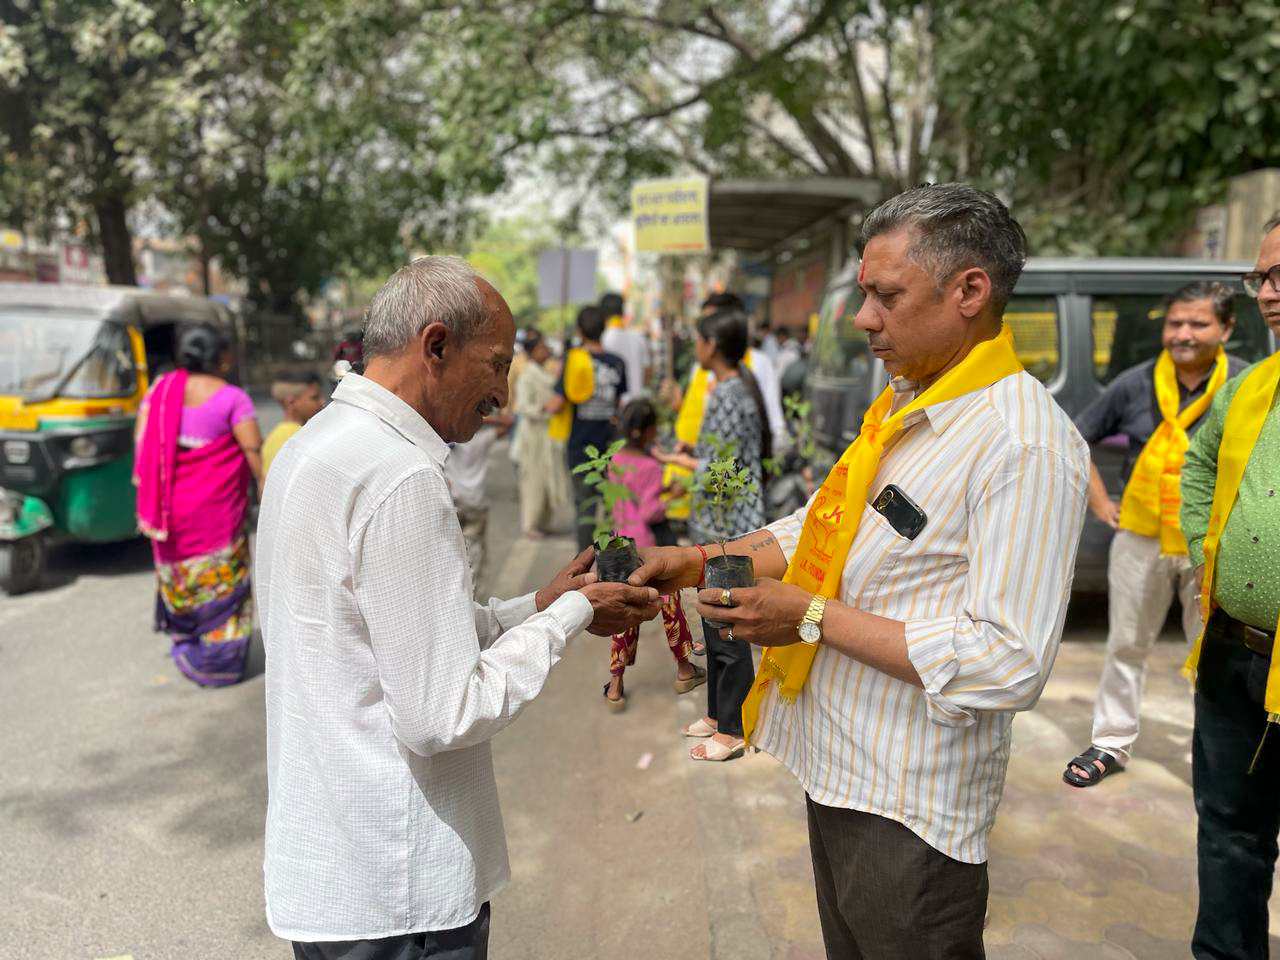 Two men exchange saplings on a busy street, celebrating World Environment Day. One man wears a yellow sash while people and auto-rickshaws bustle in the background. The event is part of an initiative by GPF India and JK Foundation to promote environmental awareness.